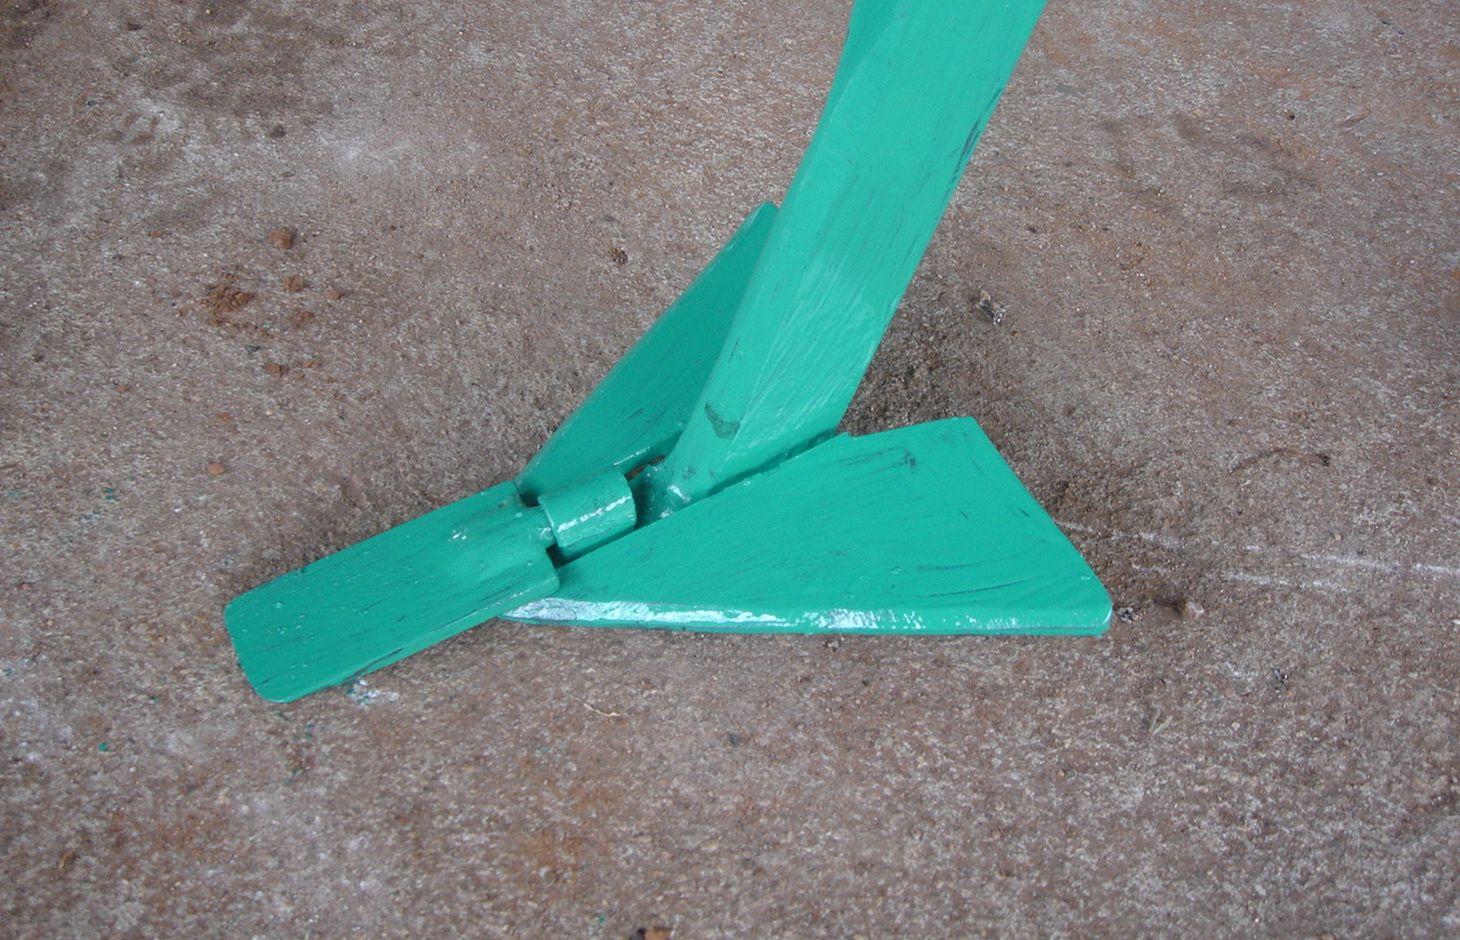 The strip tillage tool with the sub-surface wings attached